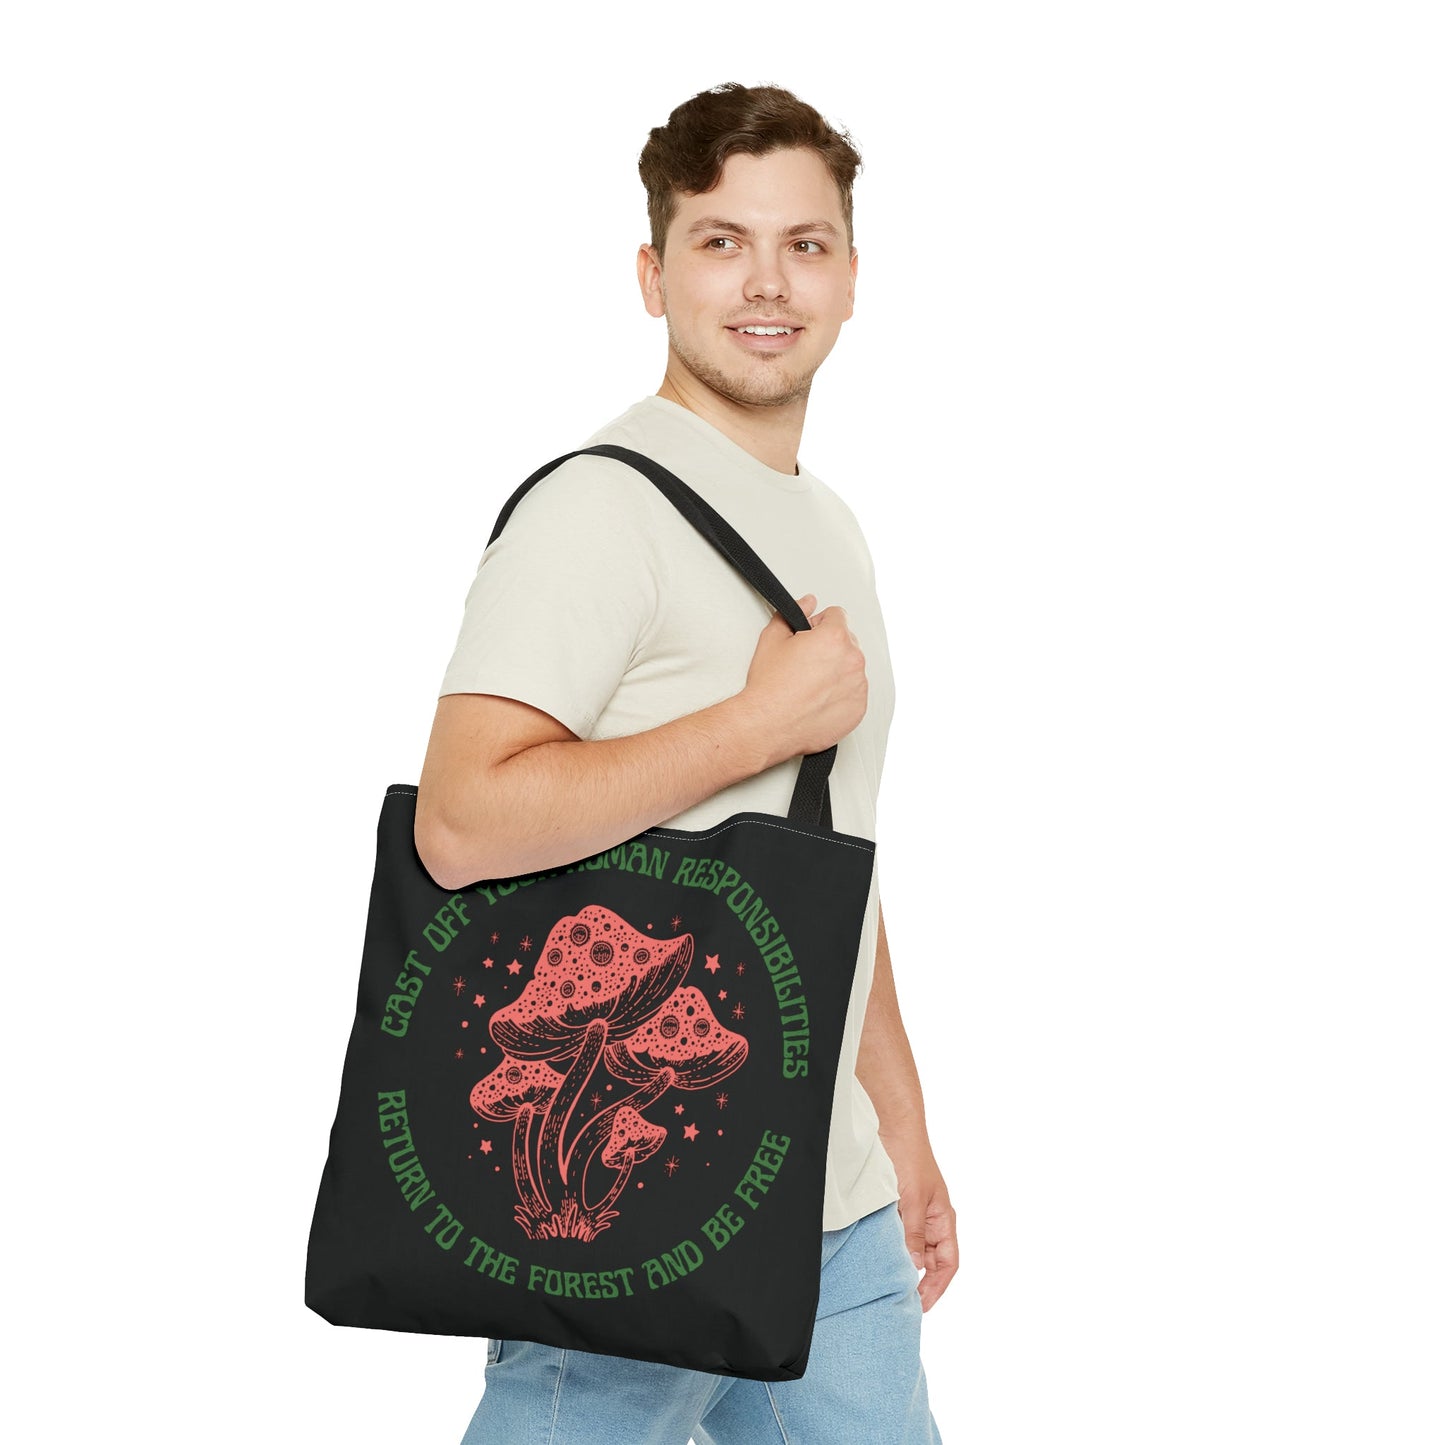 Cast Off Your Human Responsibilities Tote Bag in Black | 18" x 18"